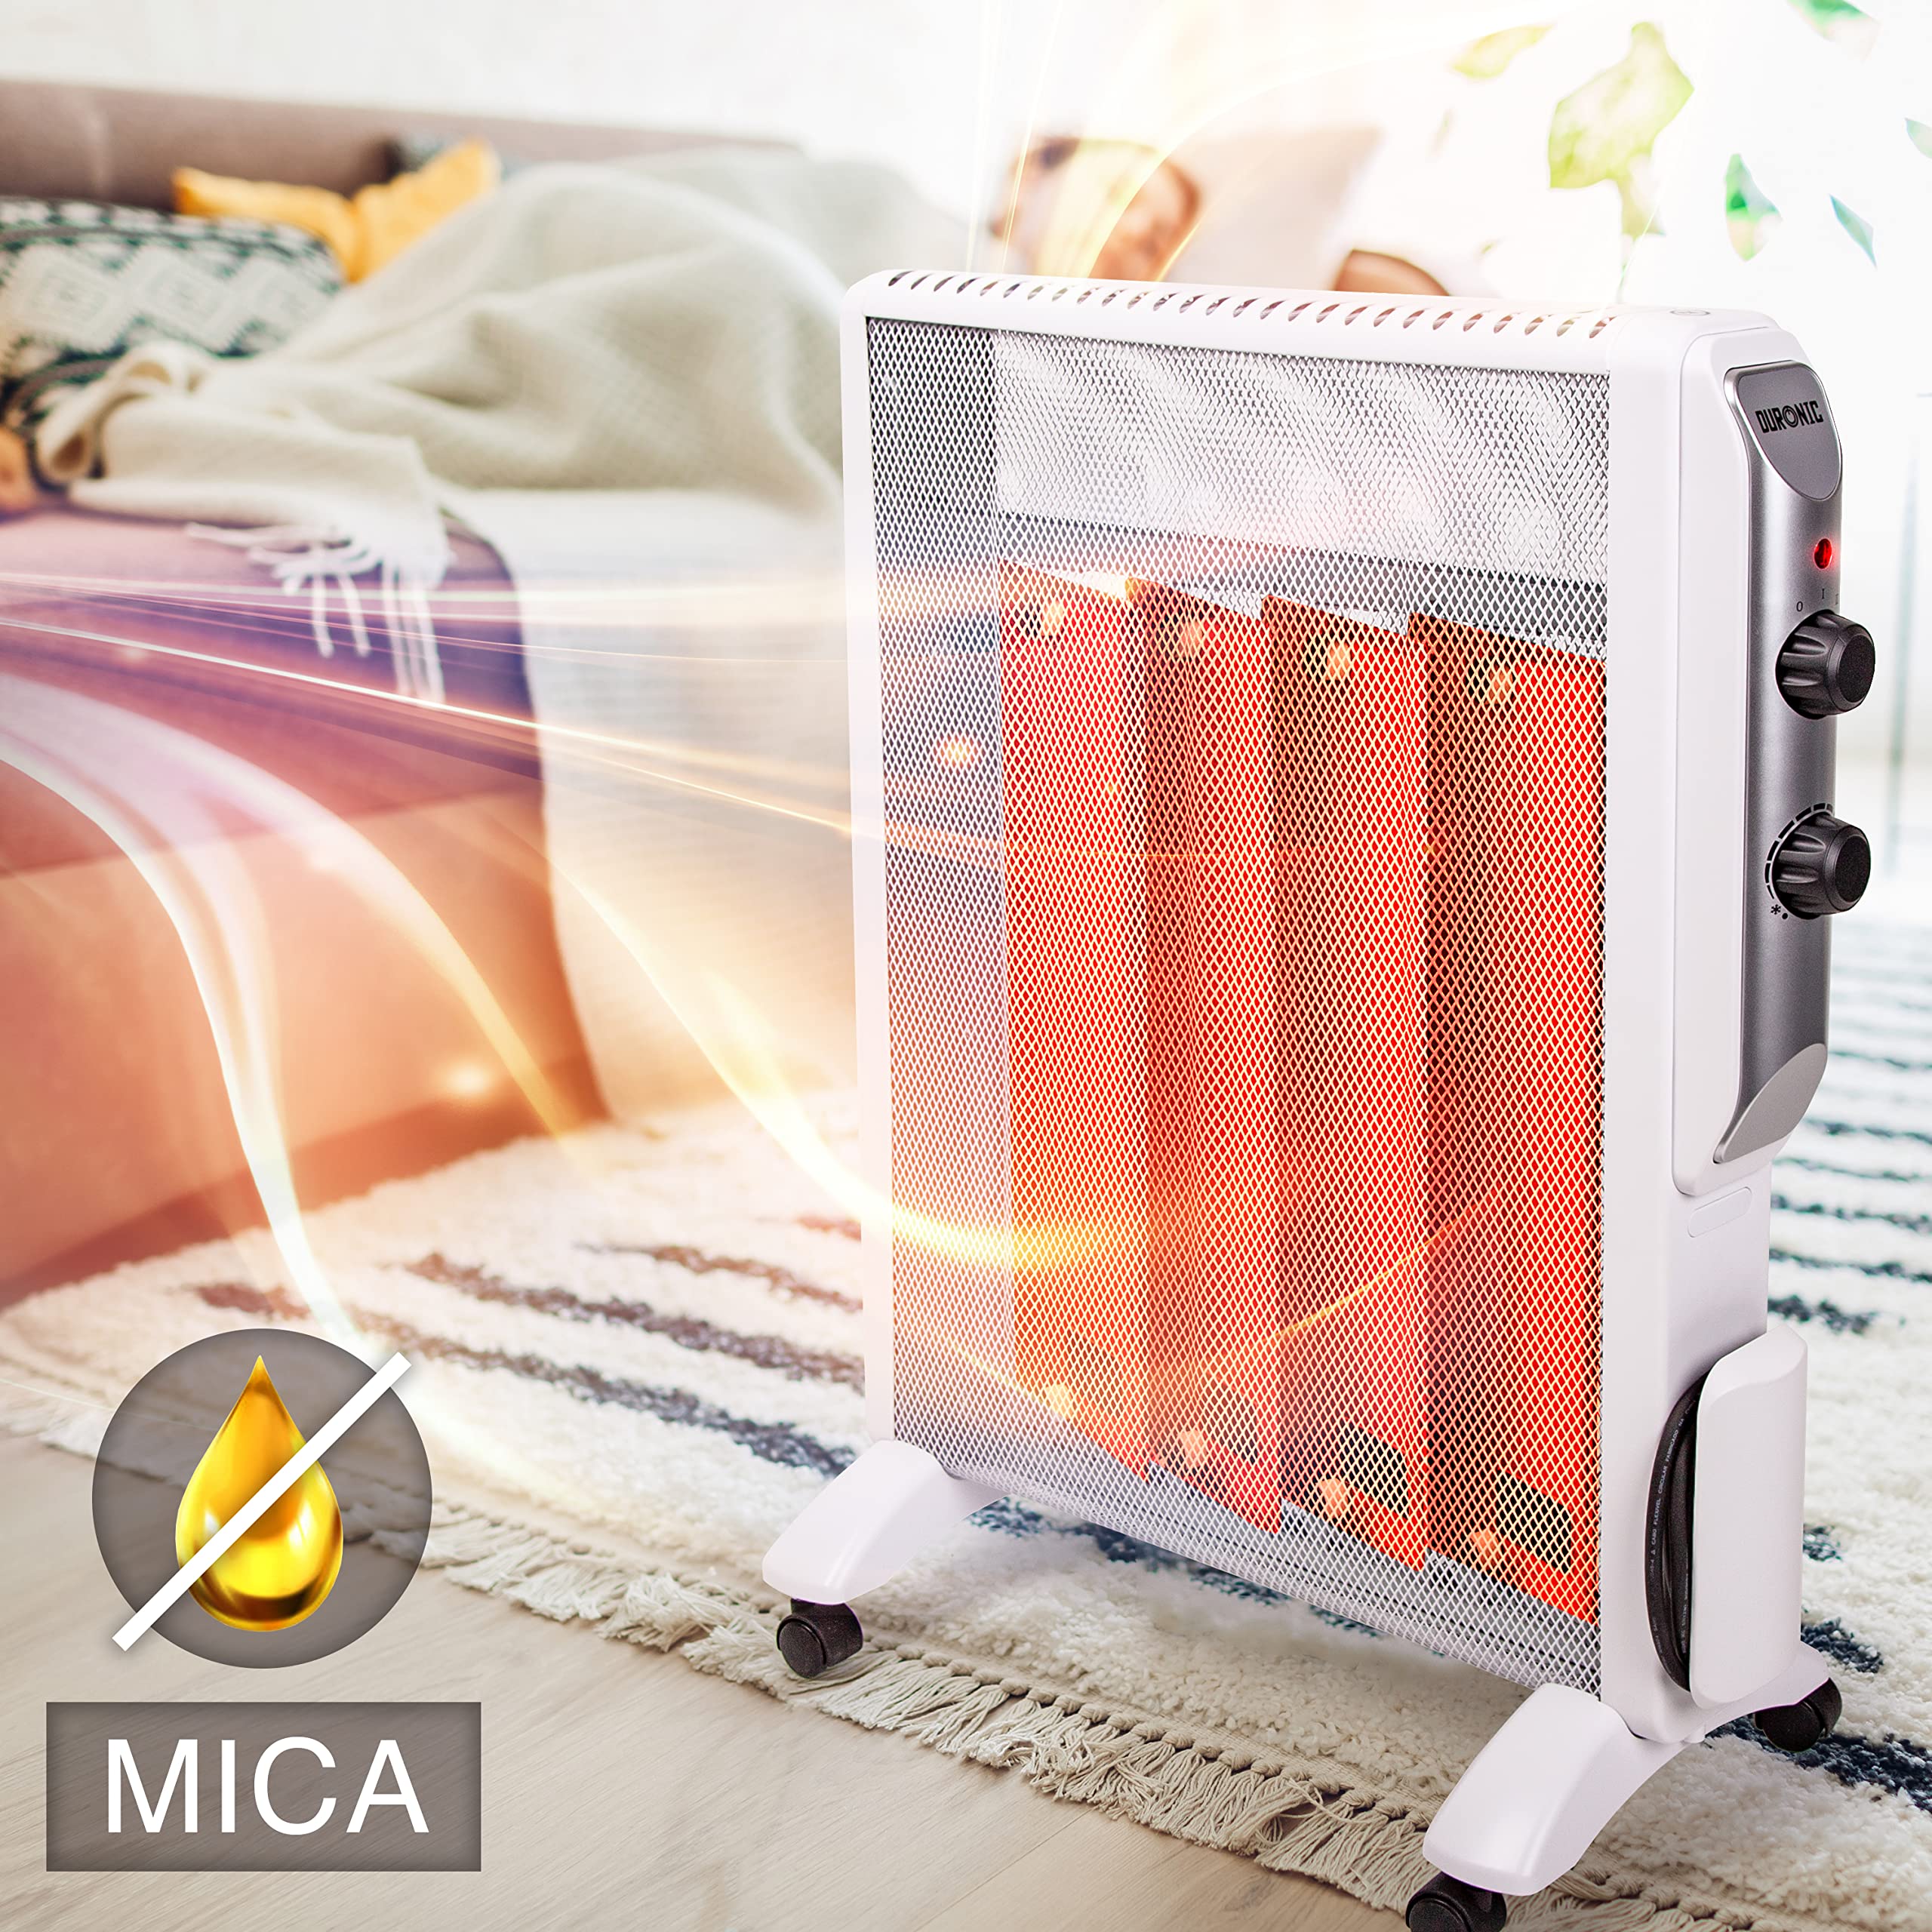 Duronic Electric Heater HV220 WE with Mica Panels, 2000W / 2kW, Radiant Micathermic Heater, Convector Heater with Thermostat, 2 Heat Settings, Oil Free Heater - White